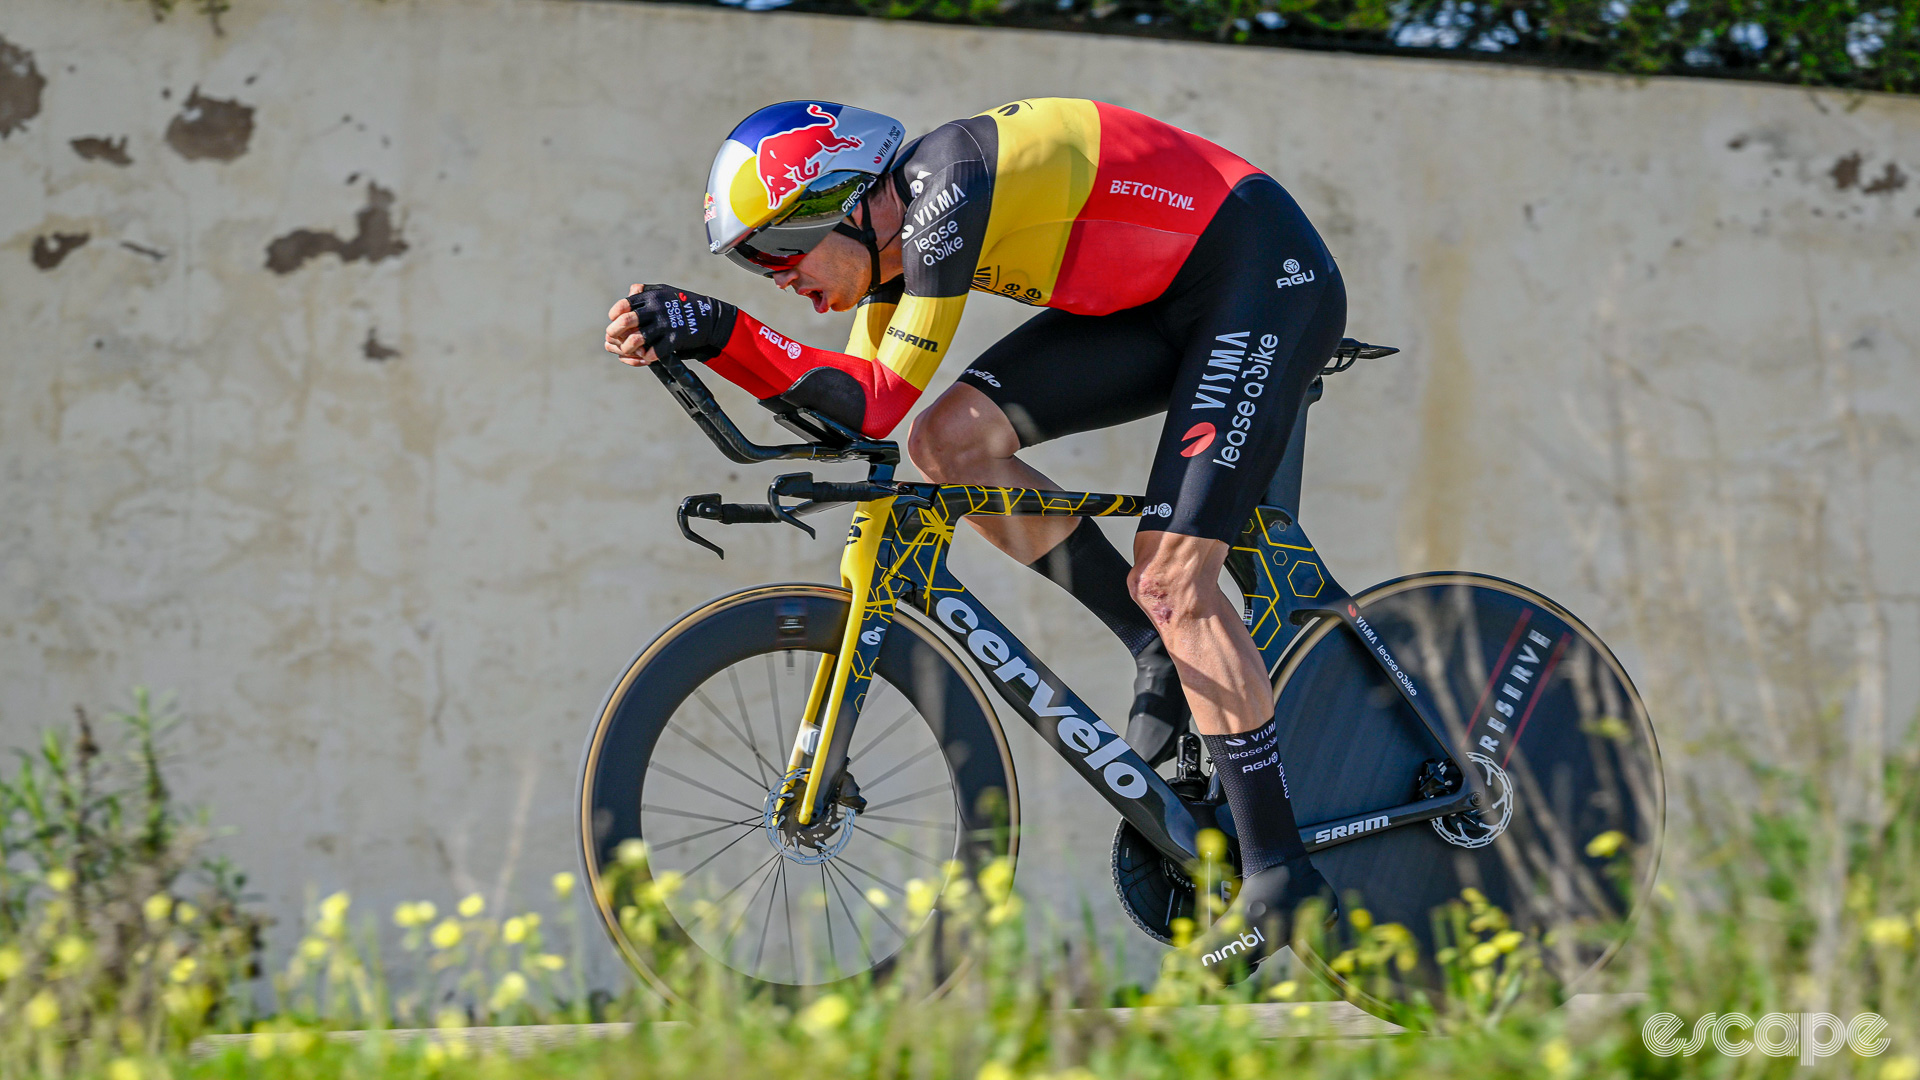 The image shows Wout van Aert time trialling.